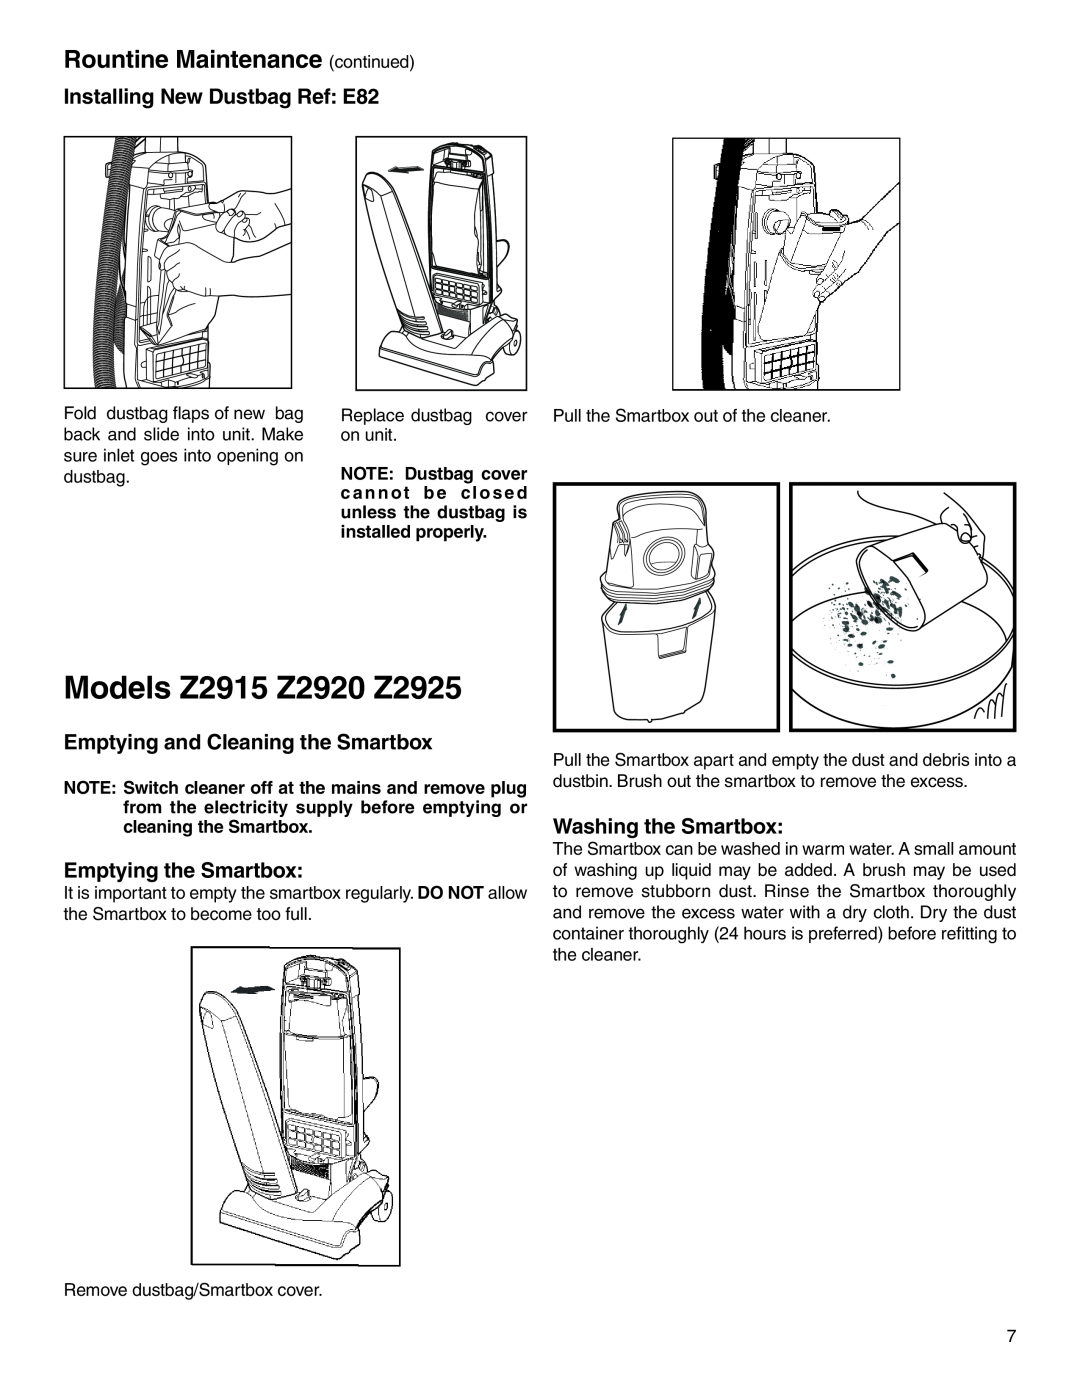 Electrolux Z2900 Series manual Models Z2915 Z2920 Z2925, Rountine Maintenance continued, Installing New Dustbag Ref E82 